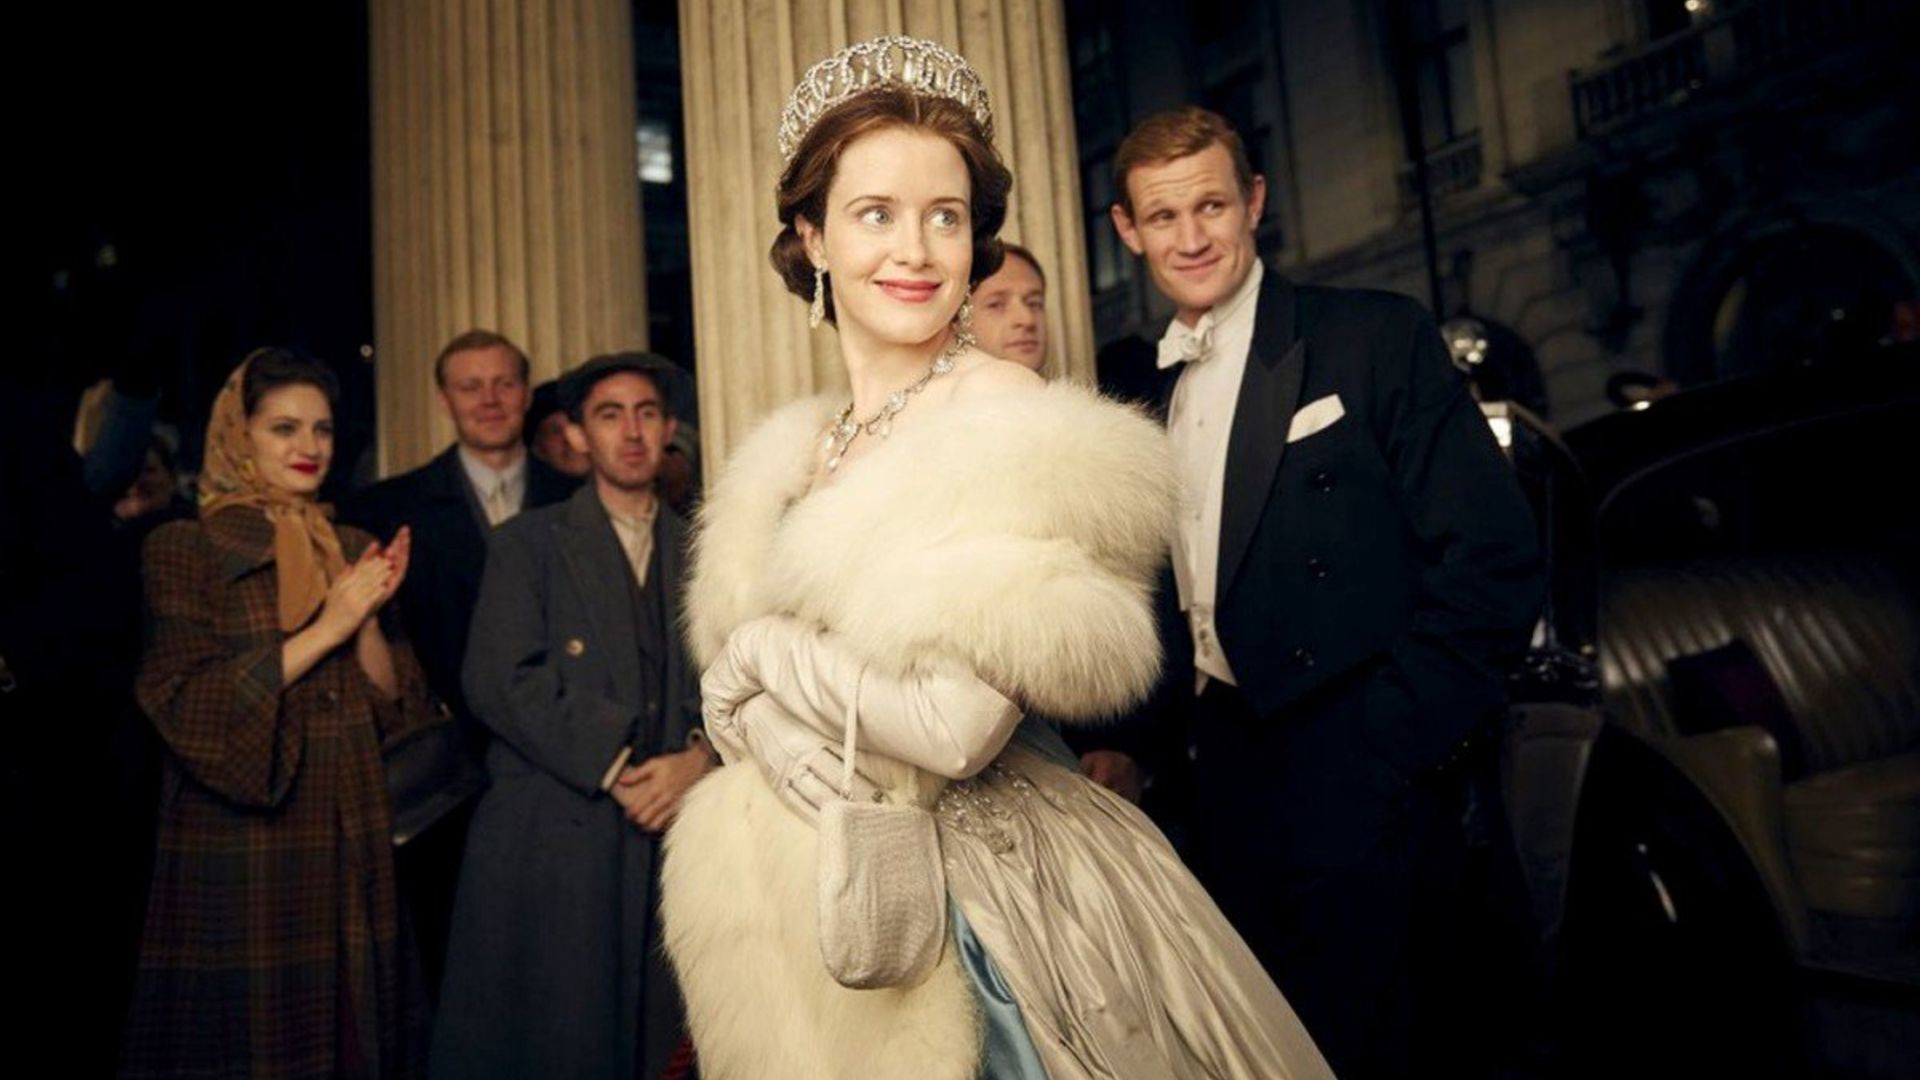 The Crown - one of the best Netflix shows you can watch right now